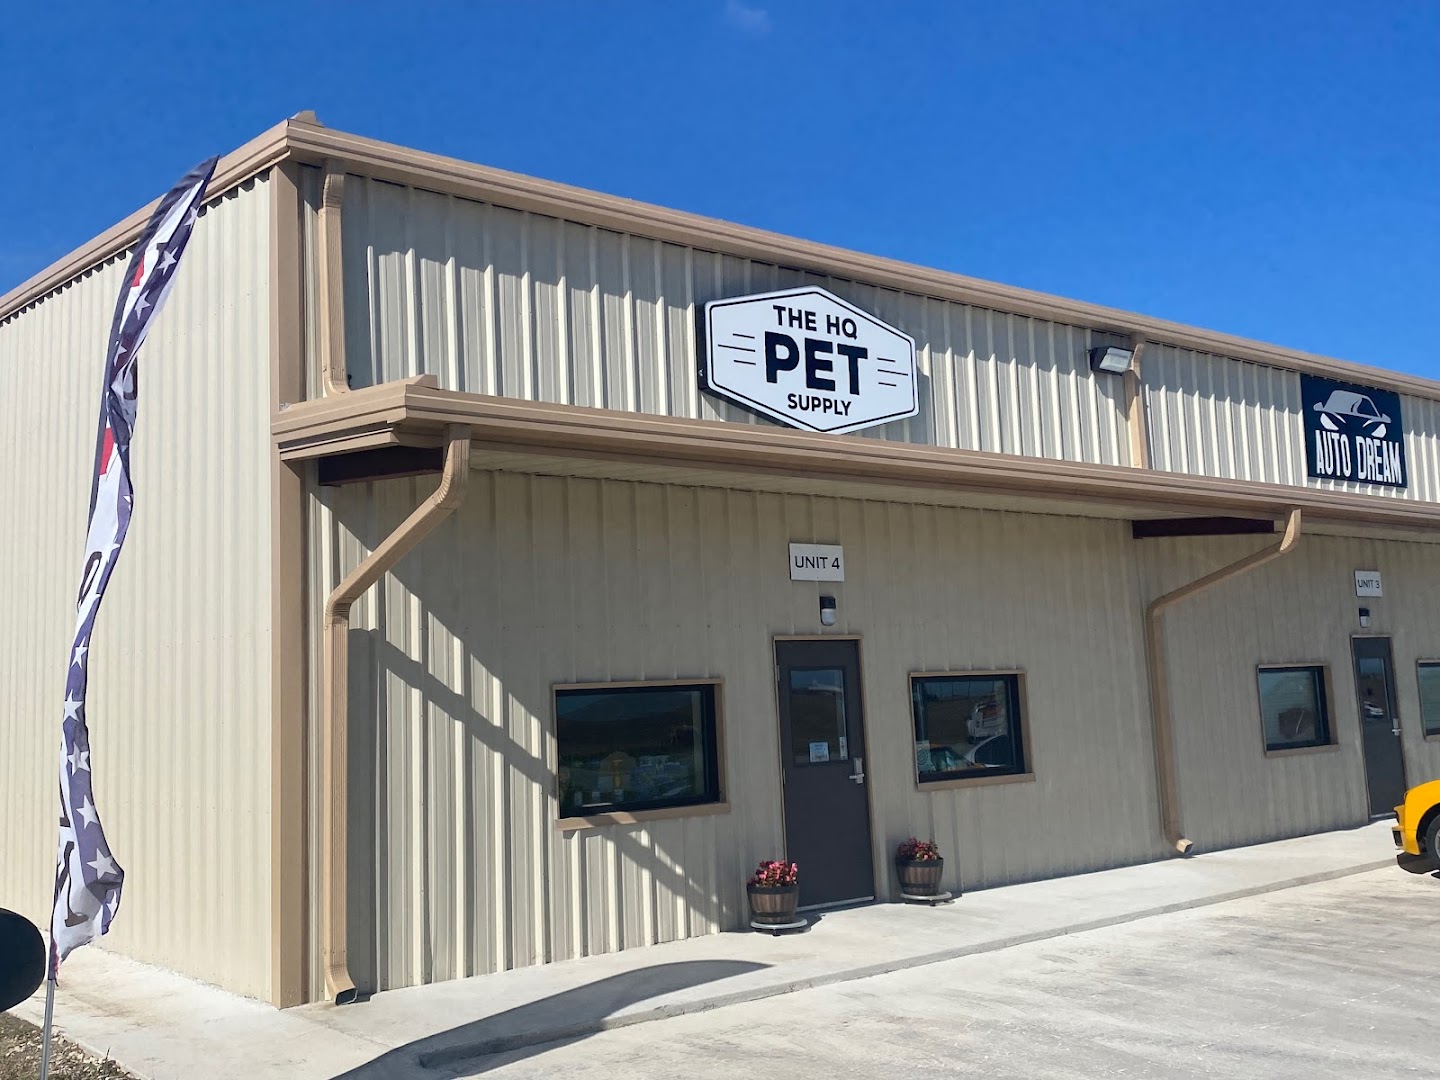 The Hindquarters Pet Supply (The HQ Pet Supply)